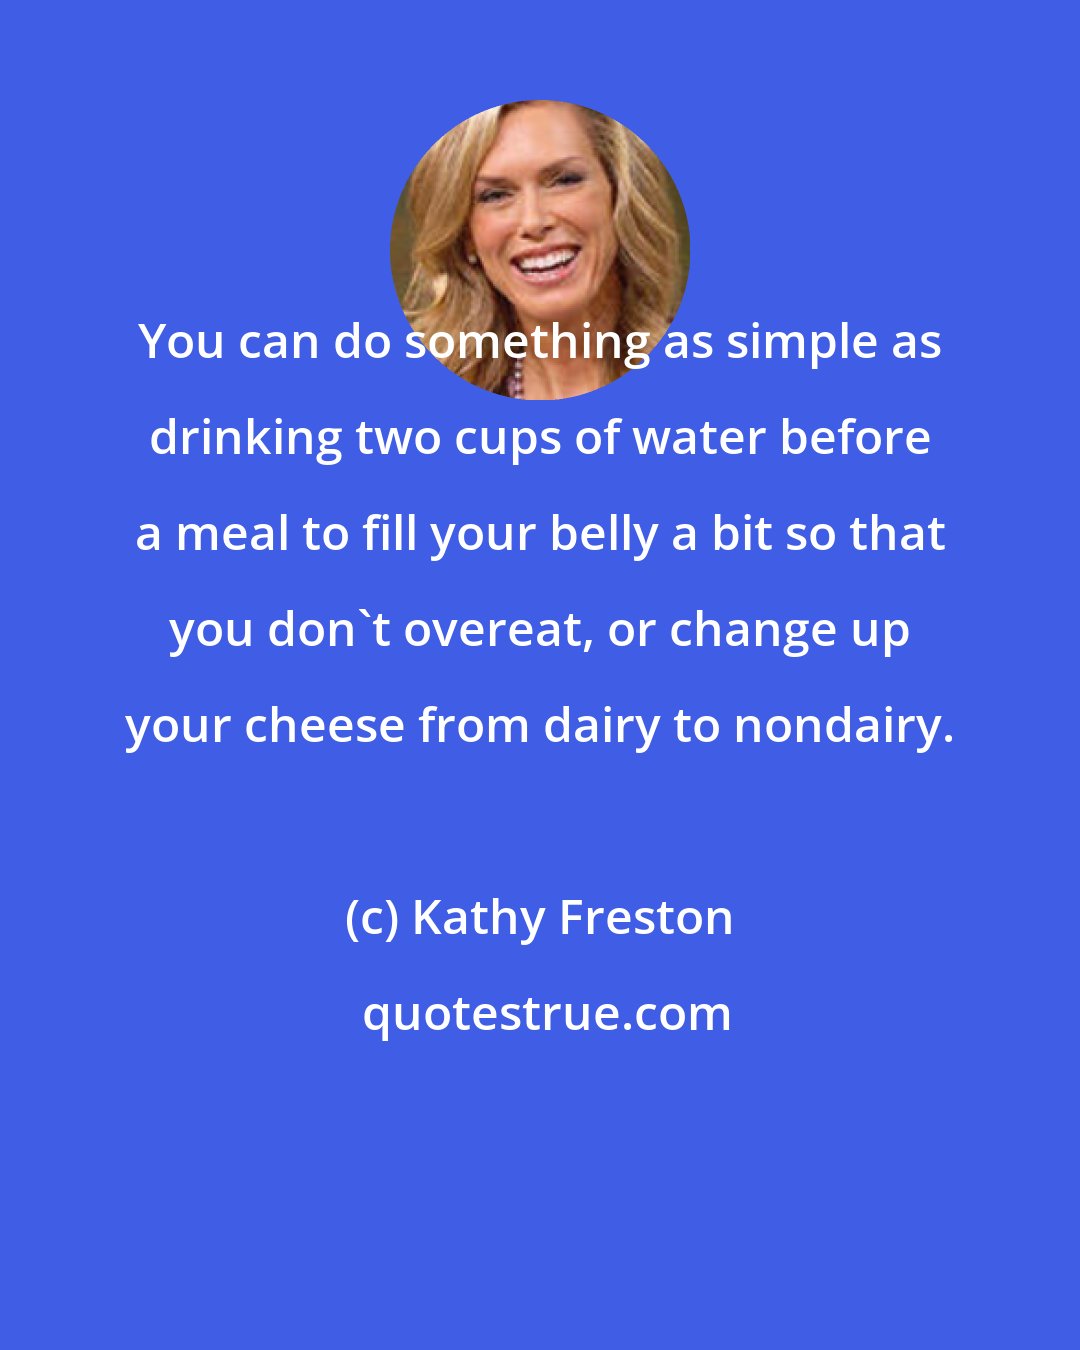 Kathy Freston: You can do something as simple as drinking two cups of water before a meal to fill your belly a bit so that you don't overeat, or change up your cheese from dairy to nondairy.